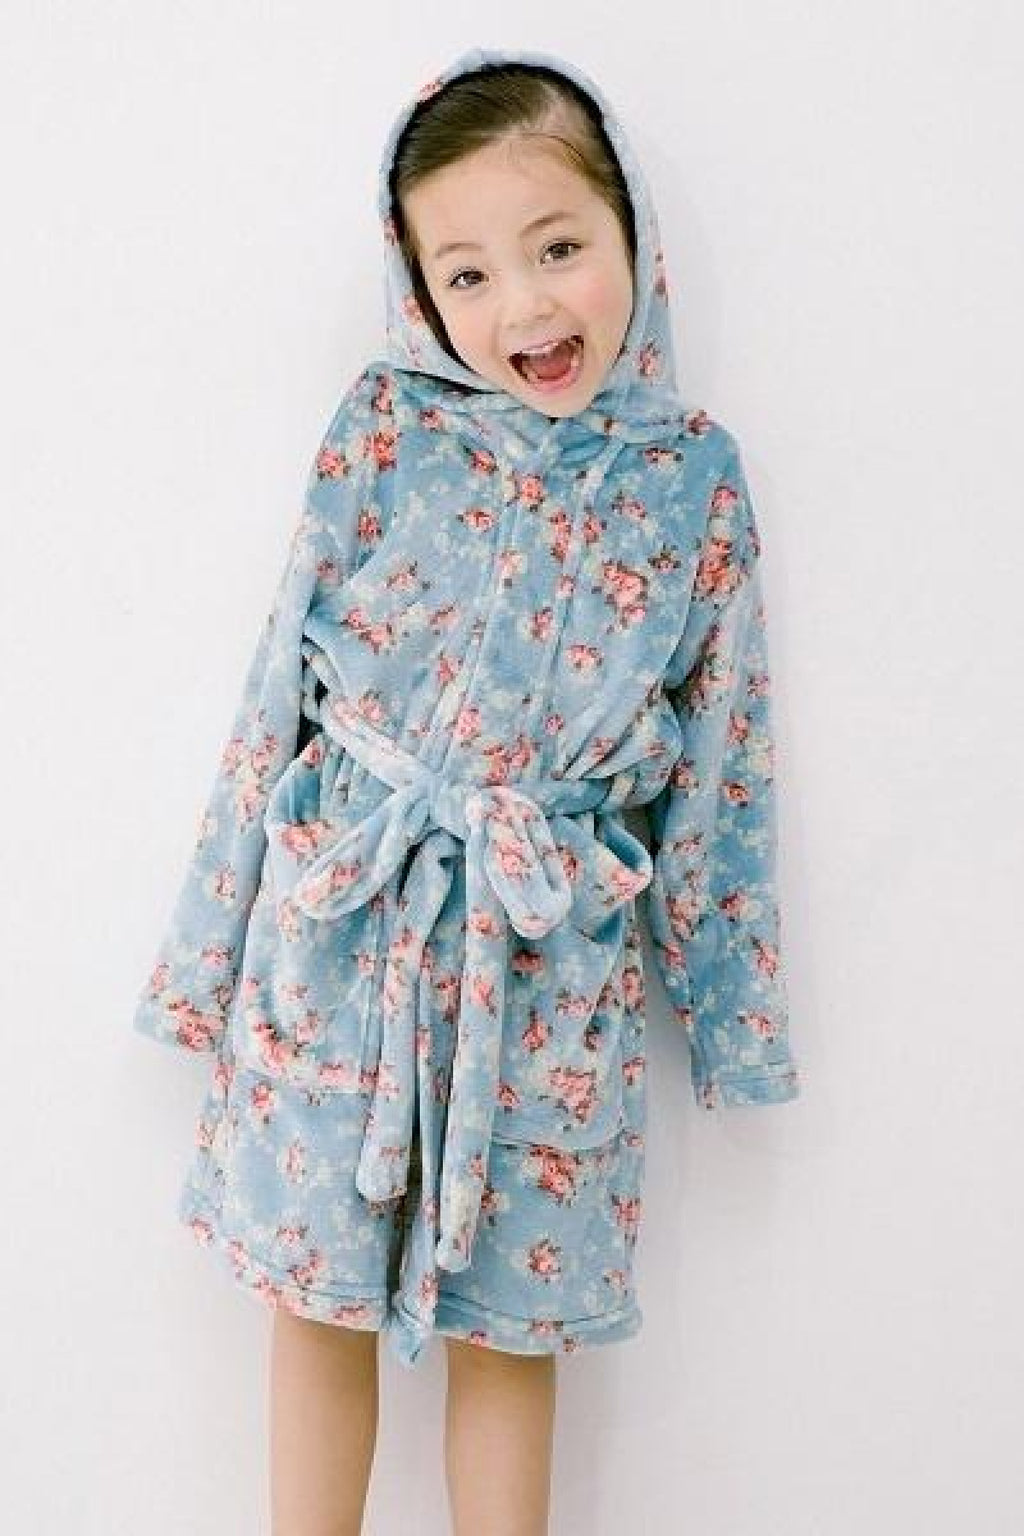 Girl wearing soft blue floral robe